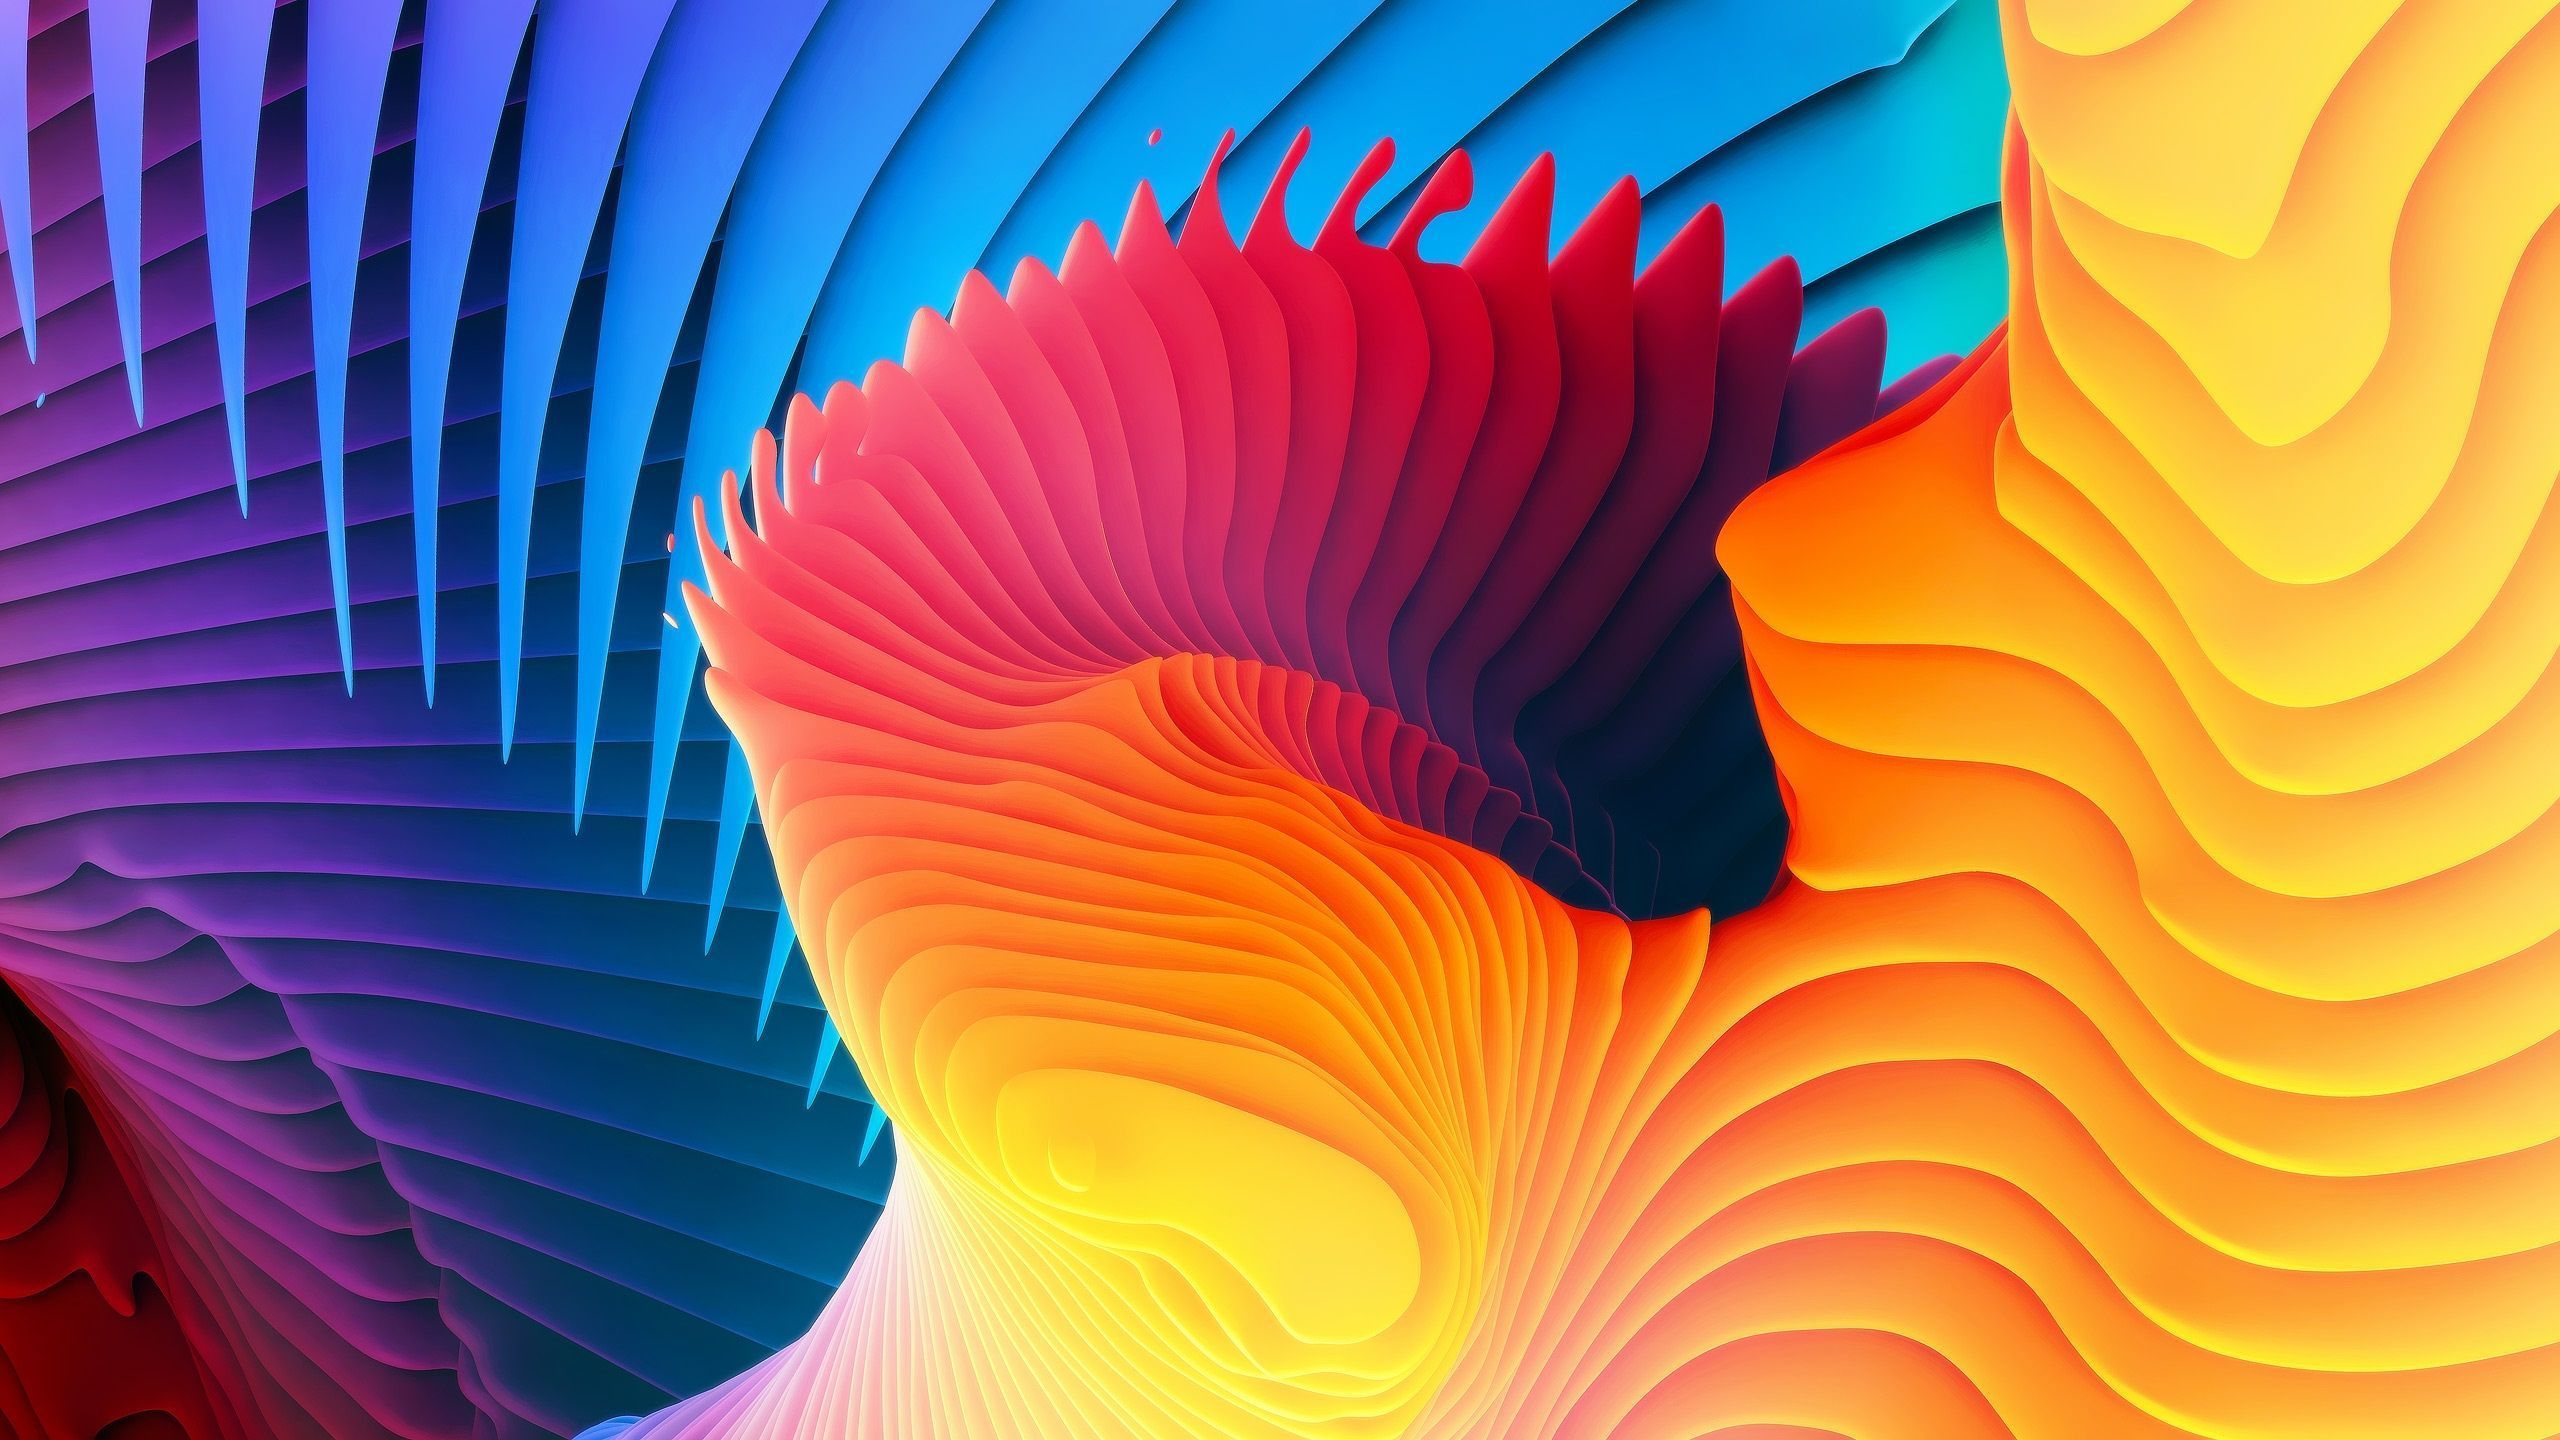 The Super Spirals Wallpapers :: HD Wallpapers